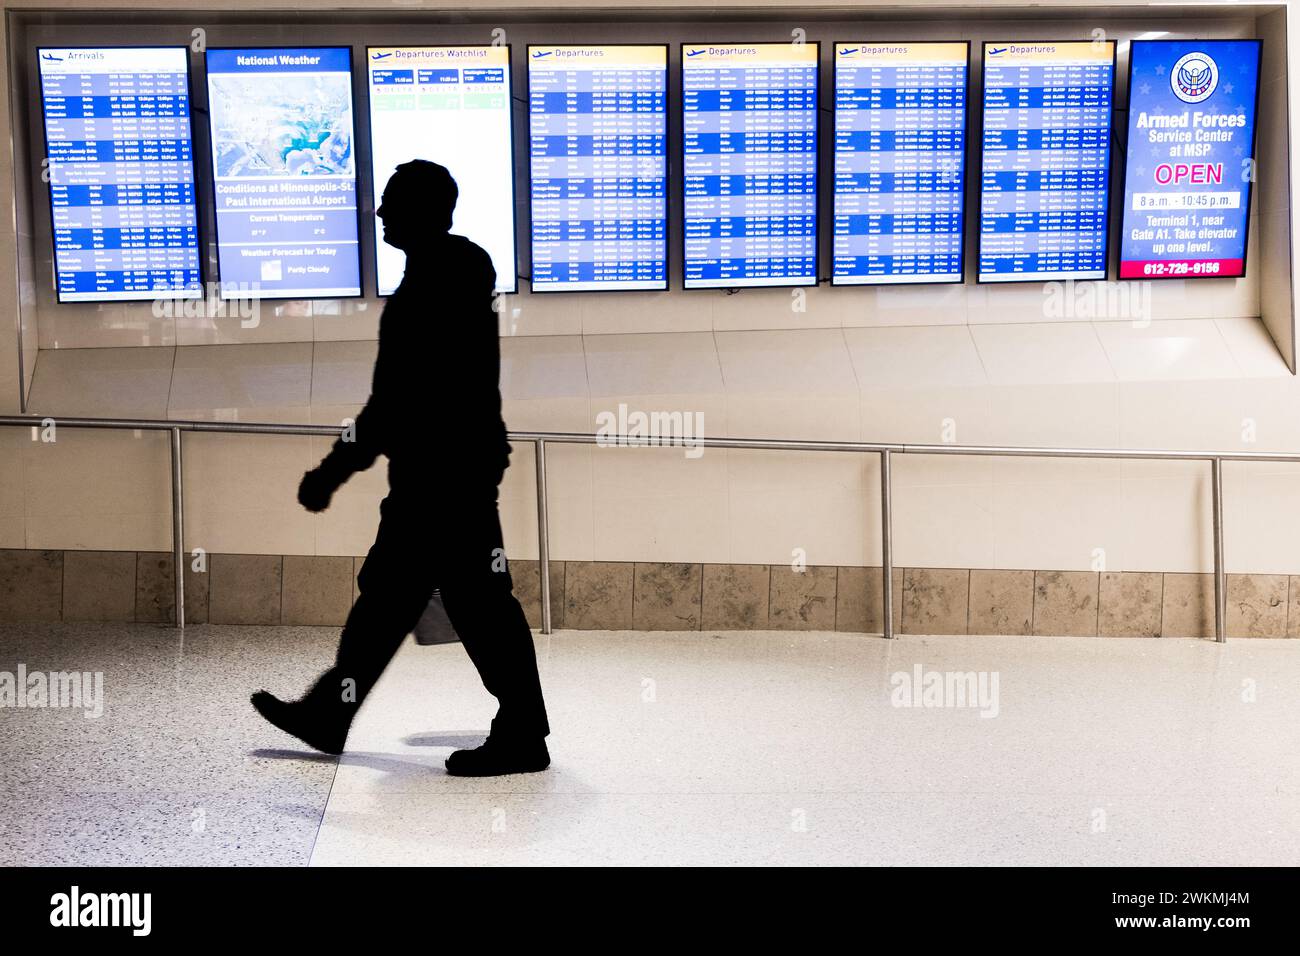 Air traveler and the arrival-departure display at the Minneapolis-St. Paul airport, USA (MSP) during a typical airport travel day. Stock Photo